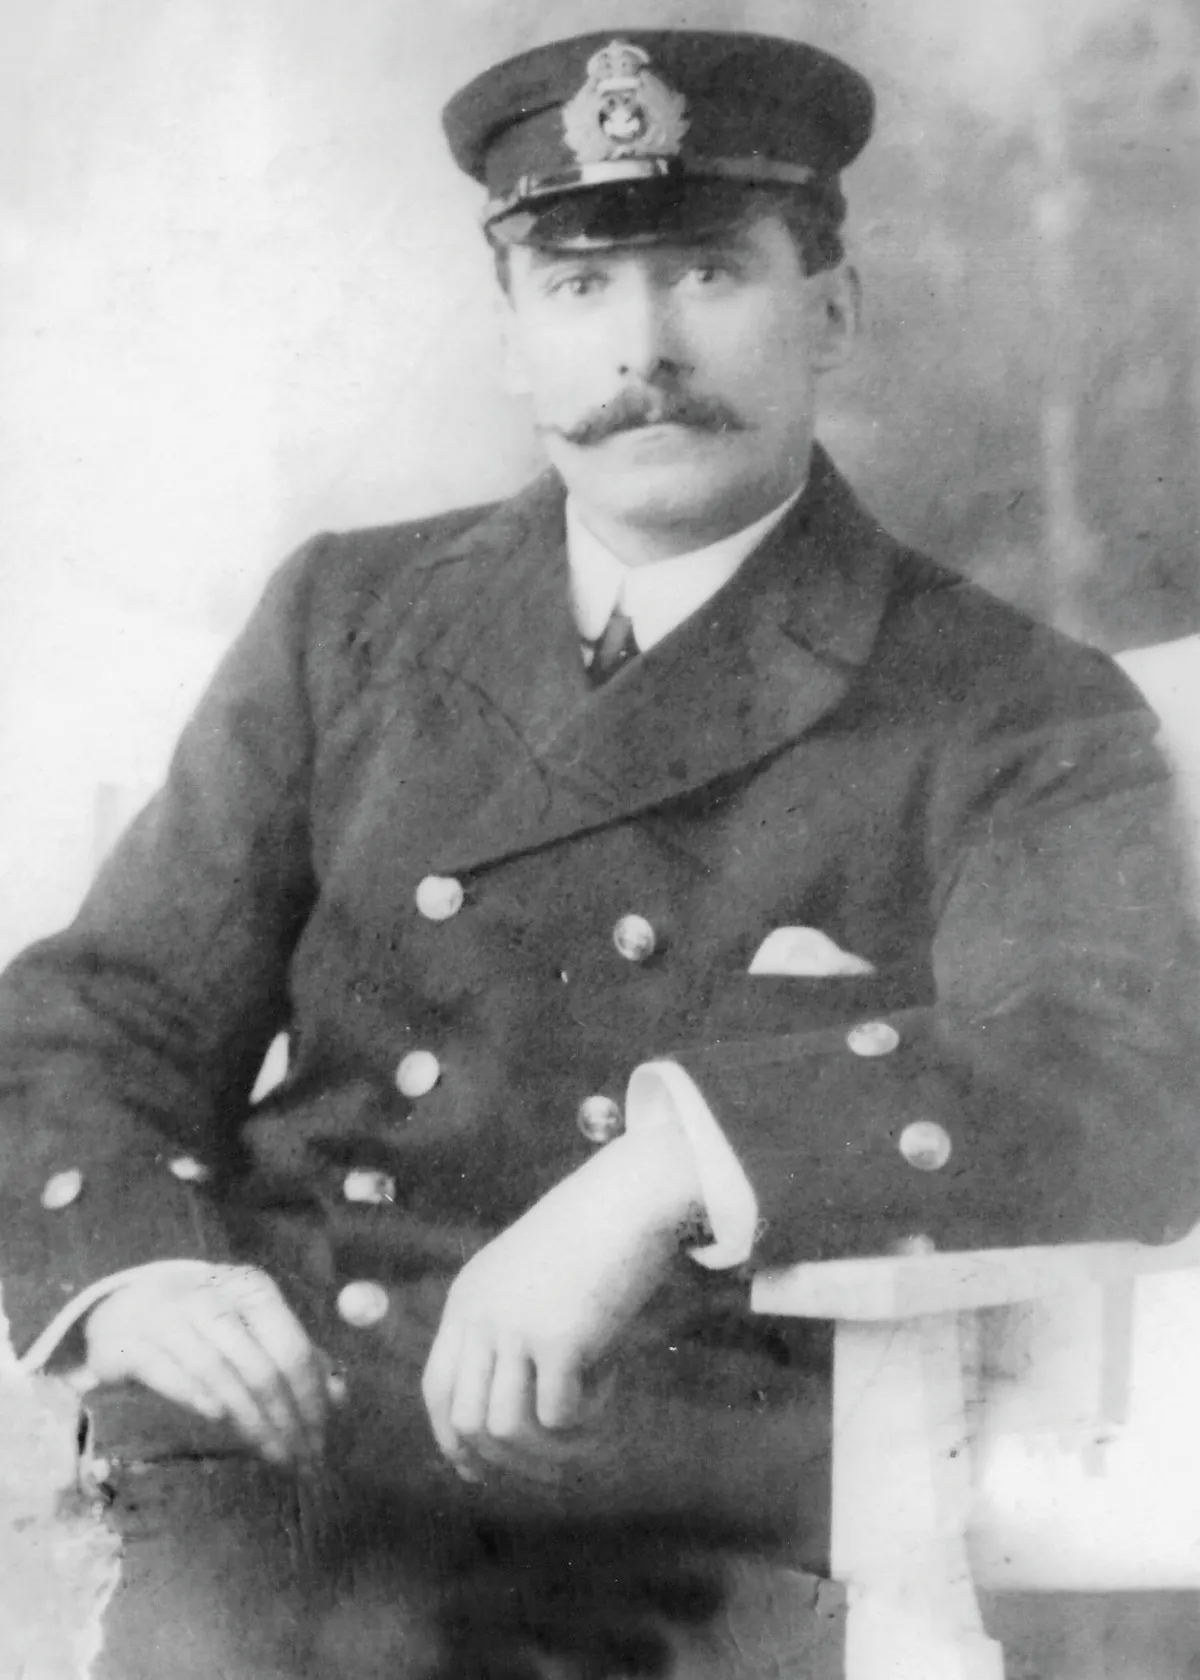 Black and white photograph of a man with a waxed moustache in Navy uniform